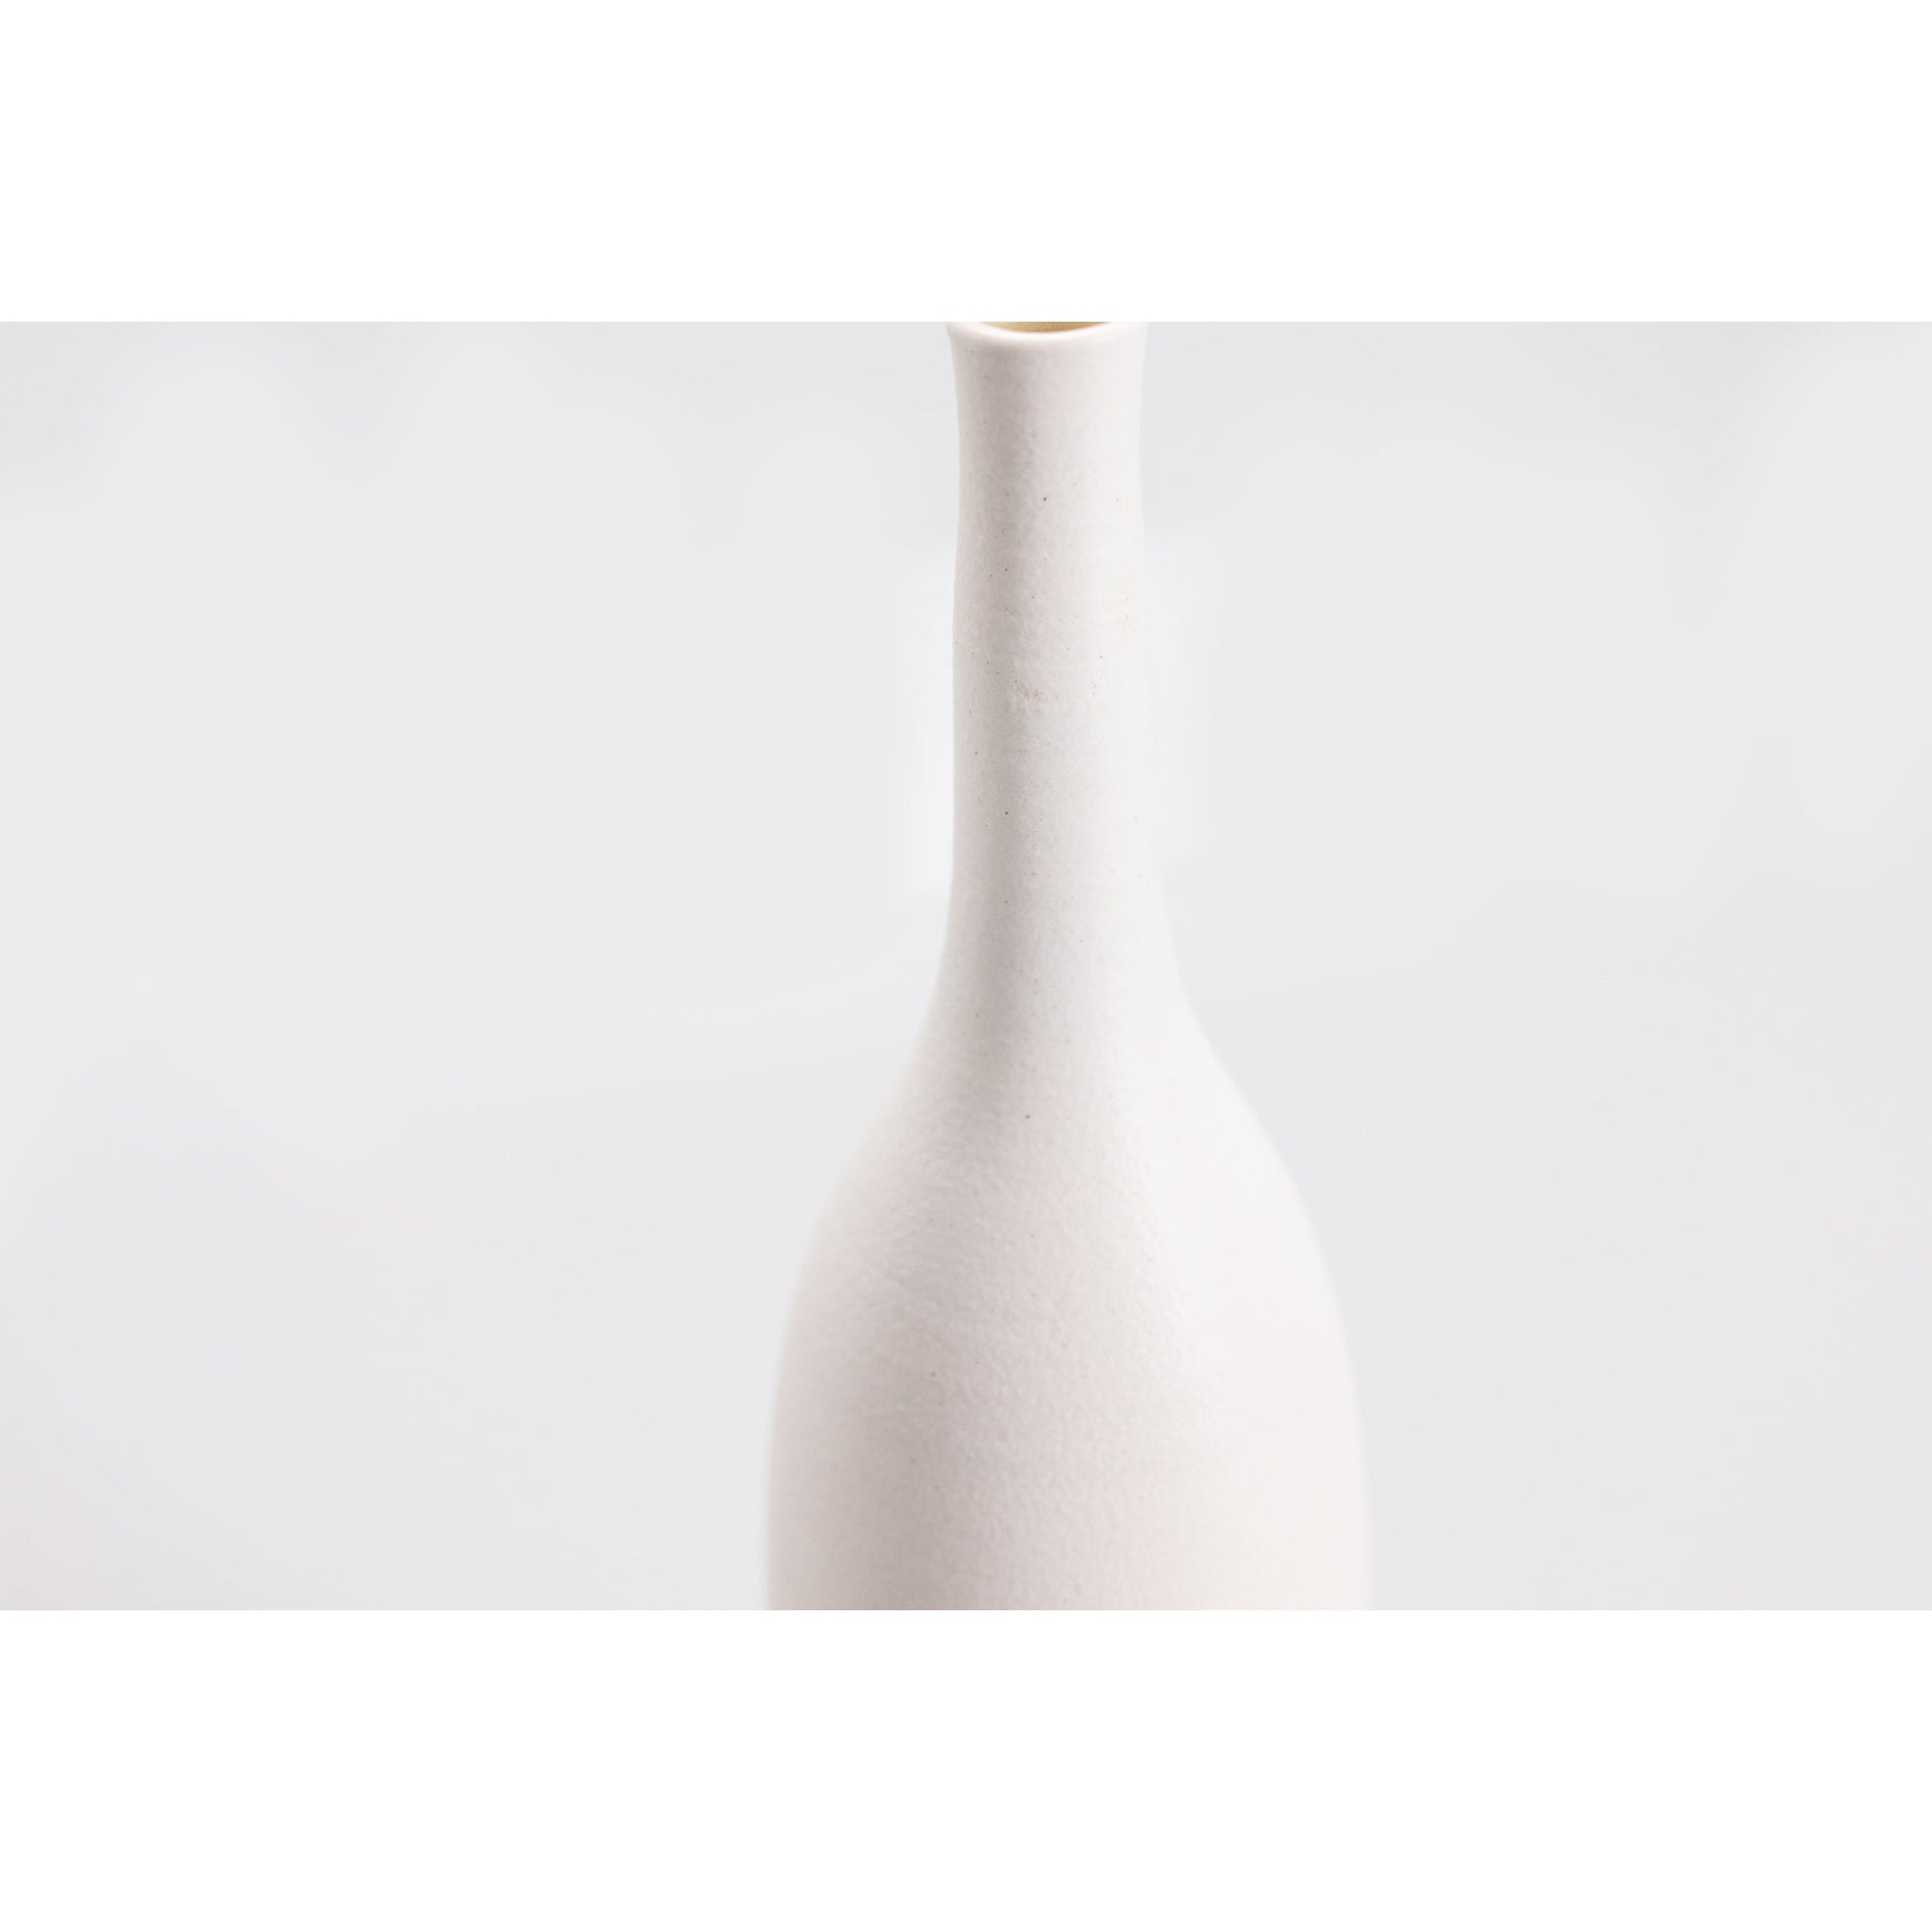 'LB145 Chalk White Bottle' by Lucy Burley ceramics, available at Padstow Gallery, Cornwall